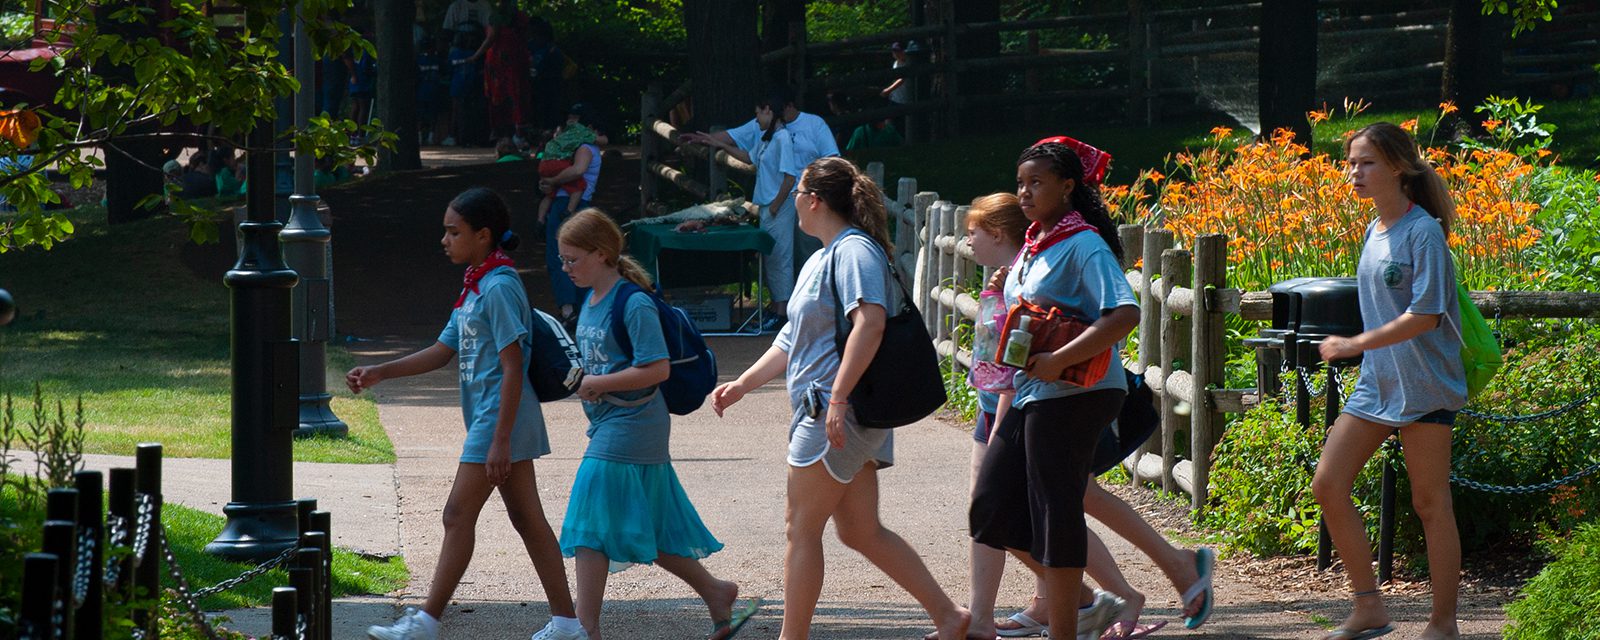 Students walking together in the zoo